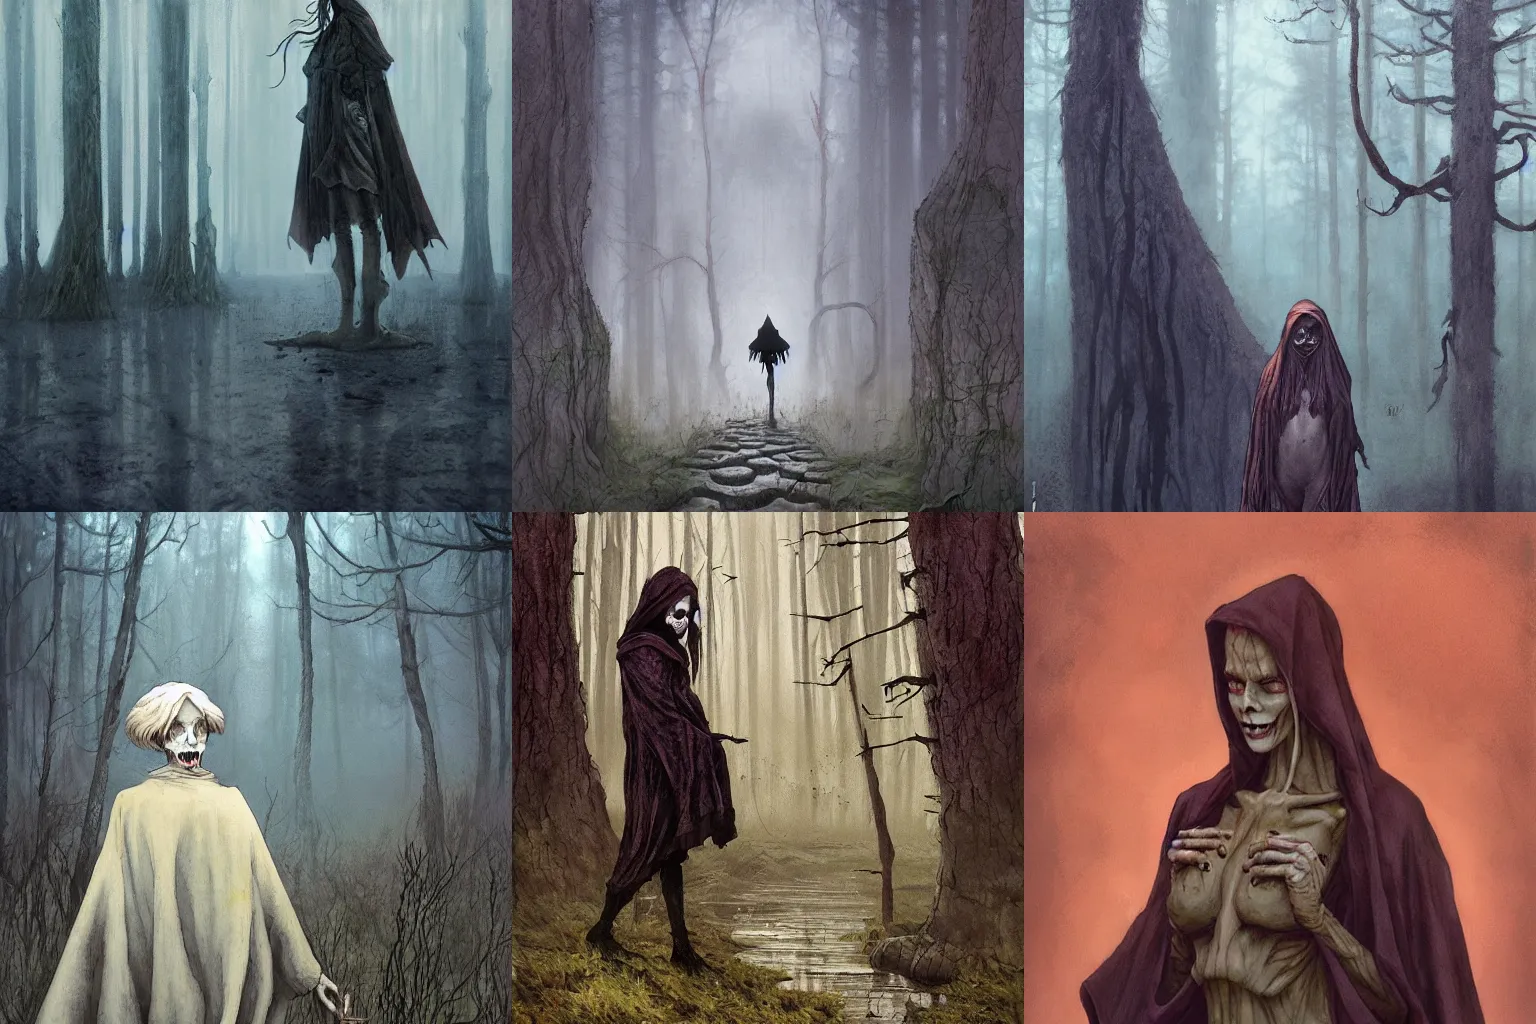 Prompt: A desperate which stares at a skull her hands. She wear a long dark robe. She stand in a foggy swamp. Painted by Régis Loisel and Enki Bilal and Tony Sandoval and Oliver Ledroit. Oil painting.